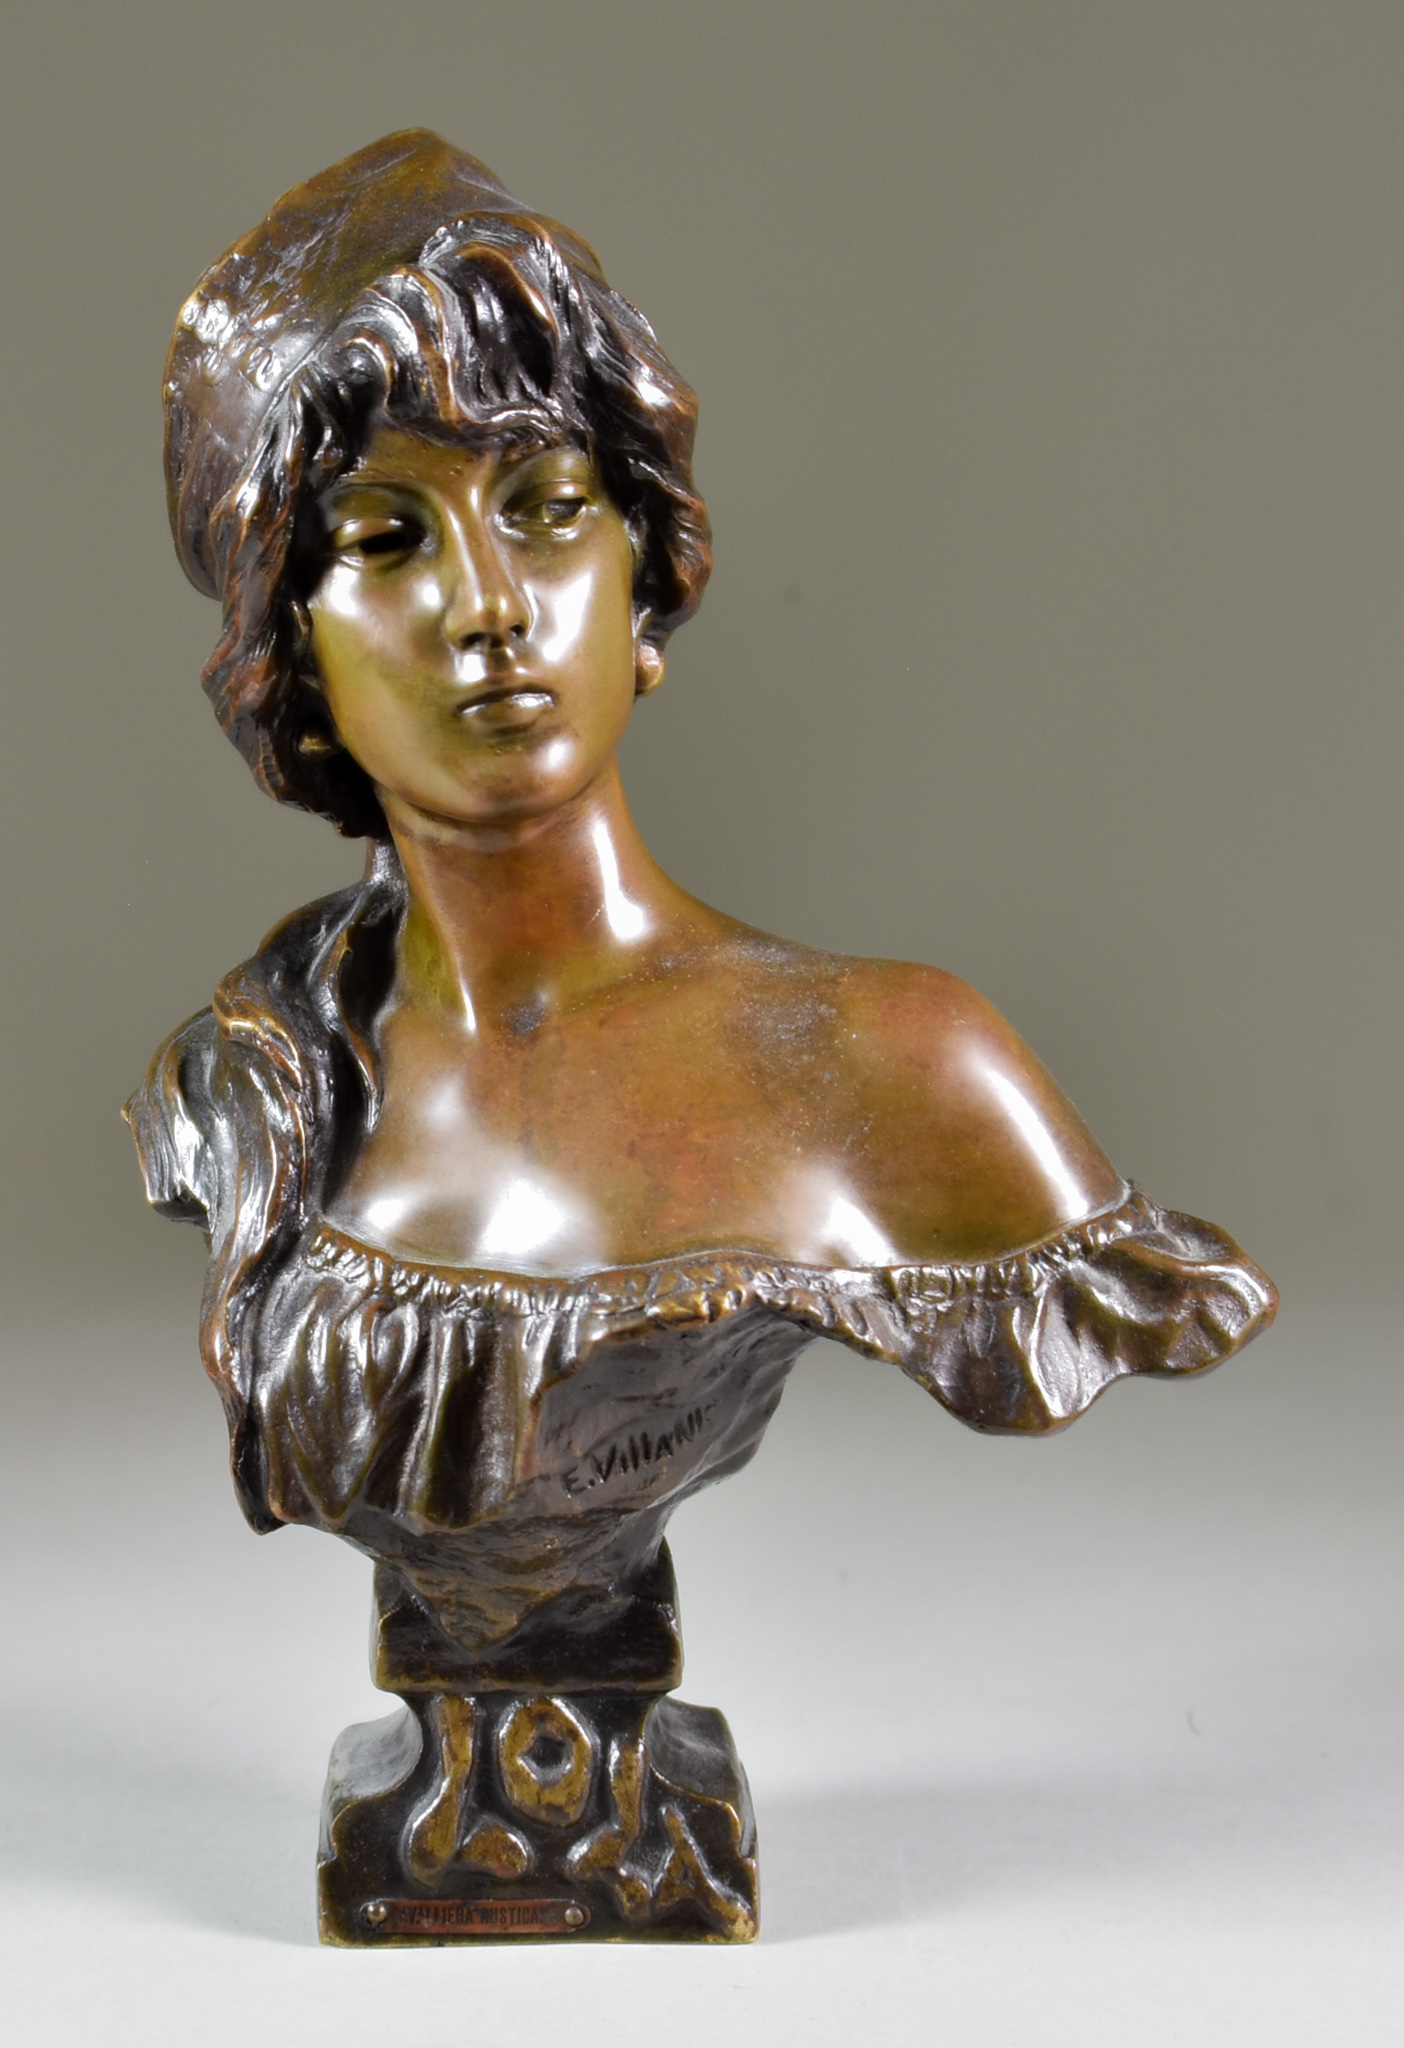 Emmanuel Villanis (1858-1914) - Bronze bust - "Lola", signed and with inscribed plaque - "Cavalliera